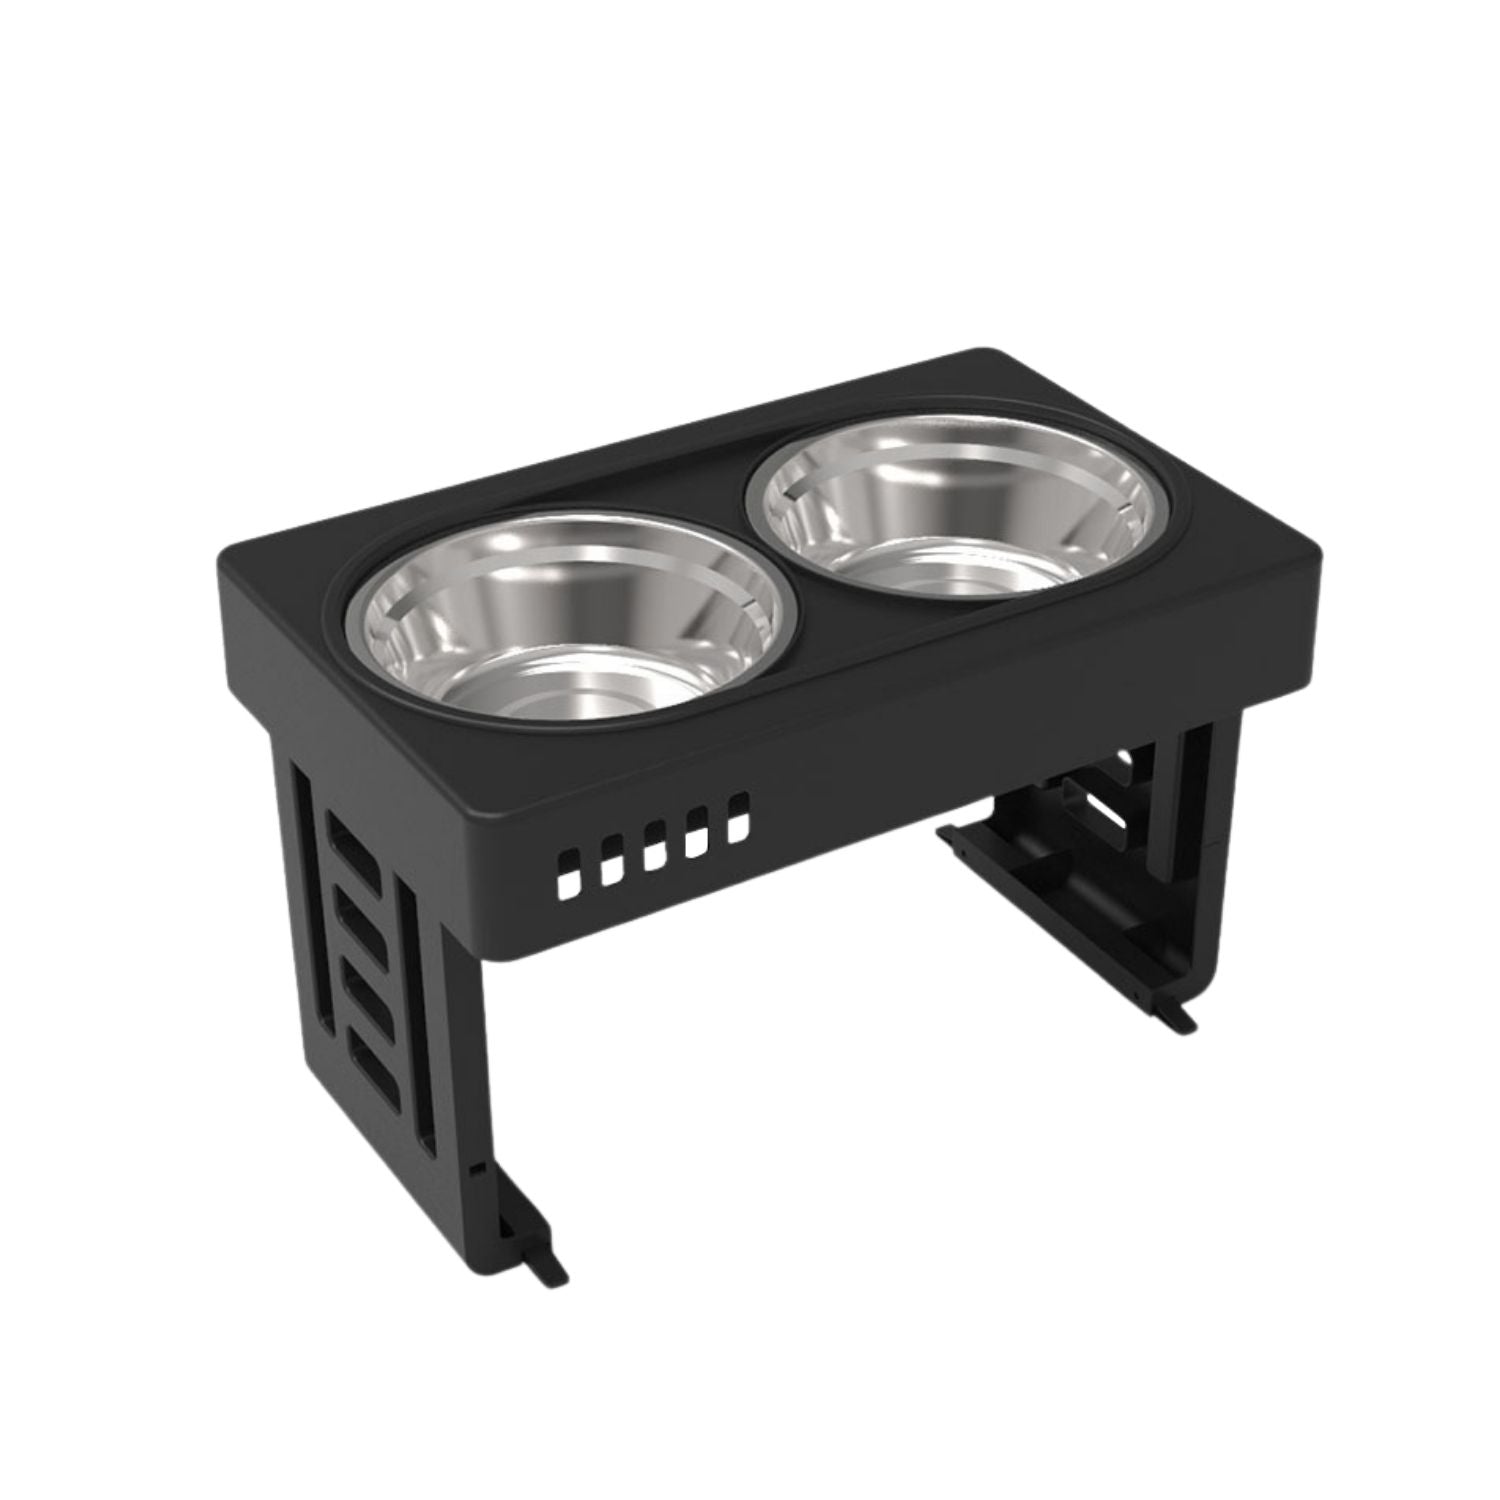 FLOOFI Elevated Raised Pet Feeder with Double Bowl (Black)